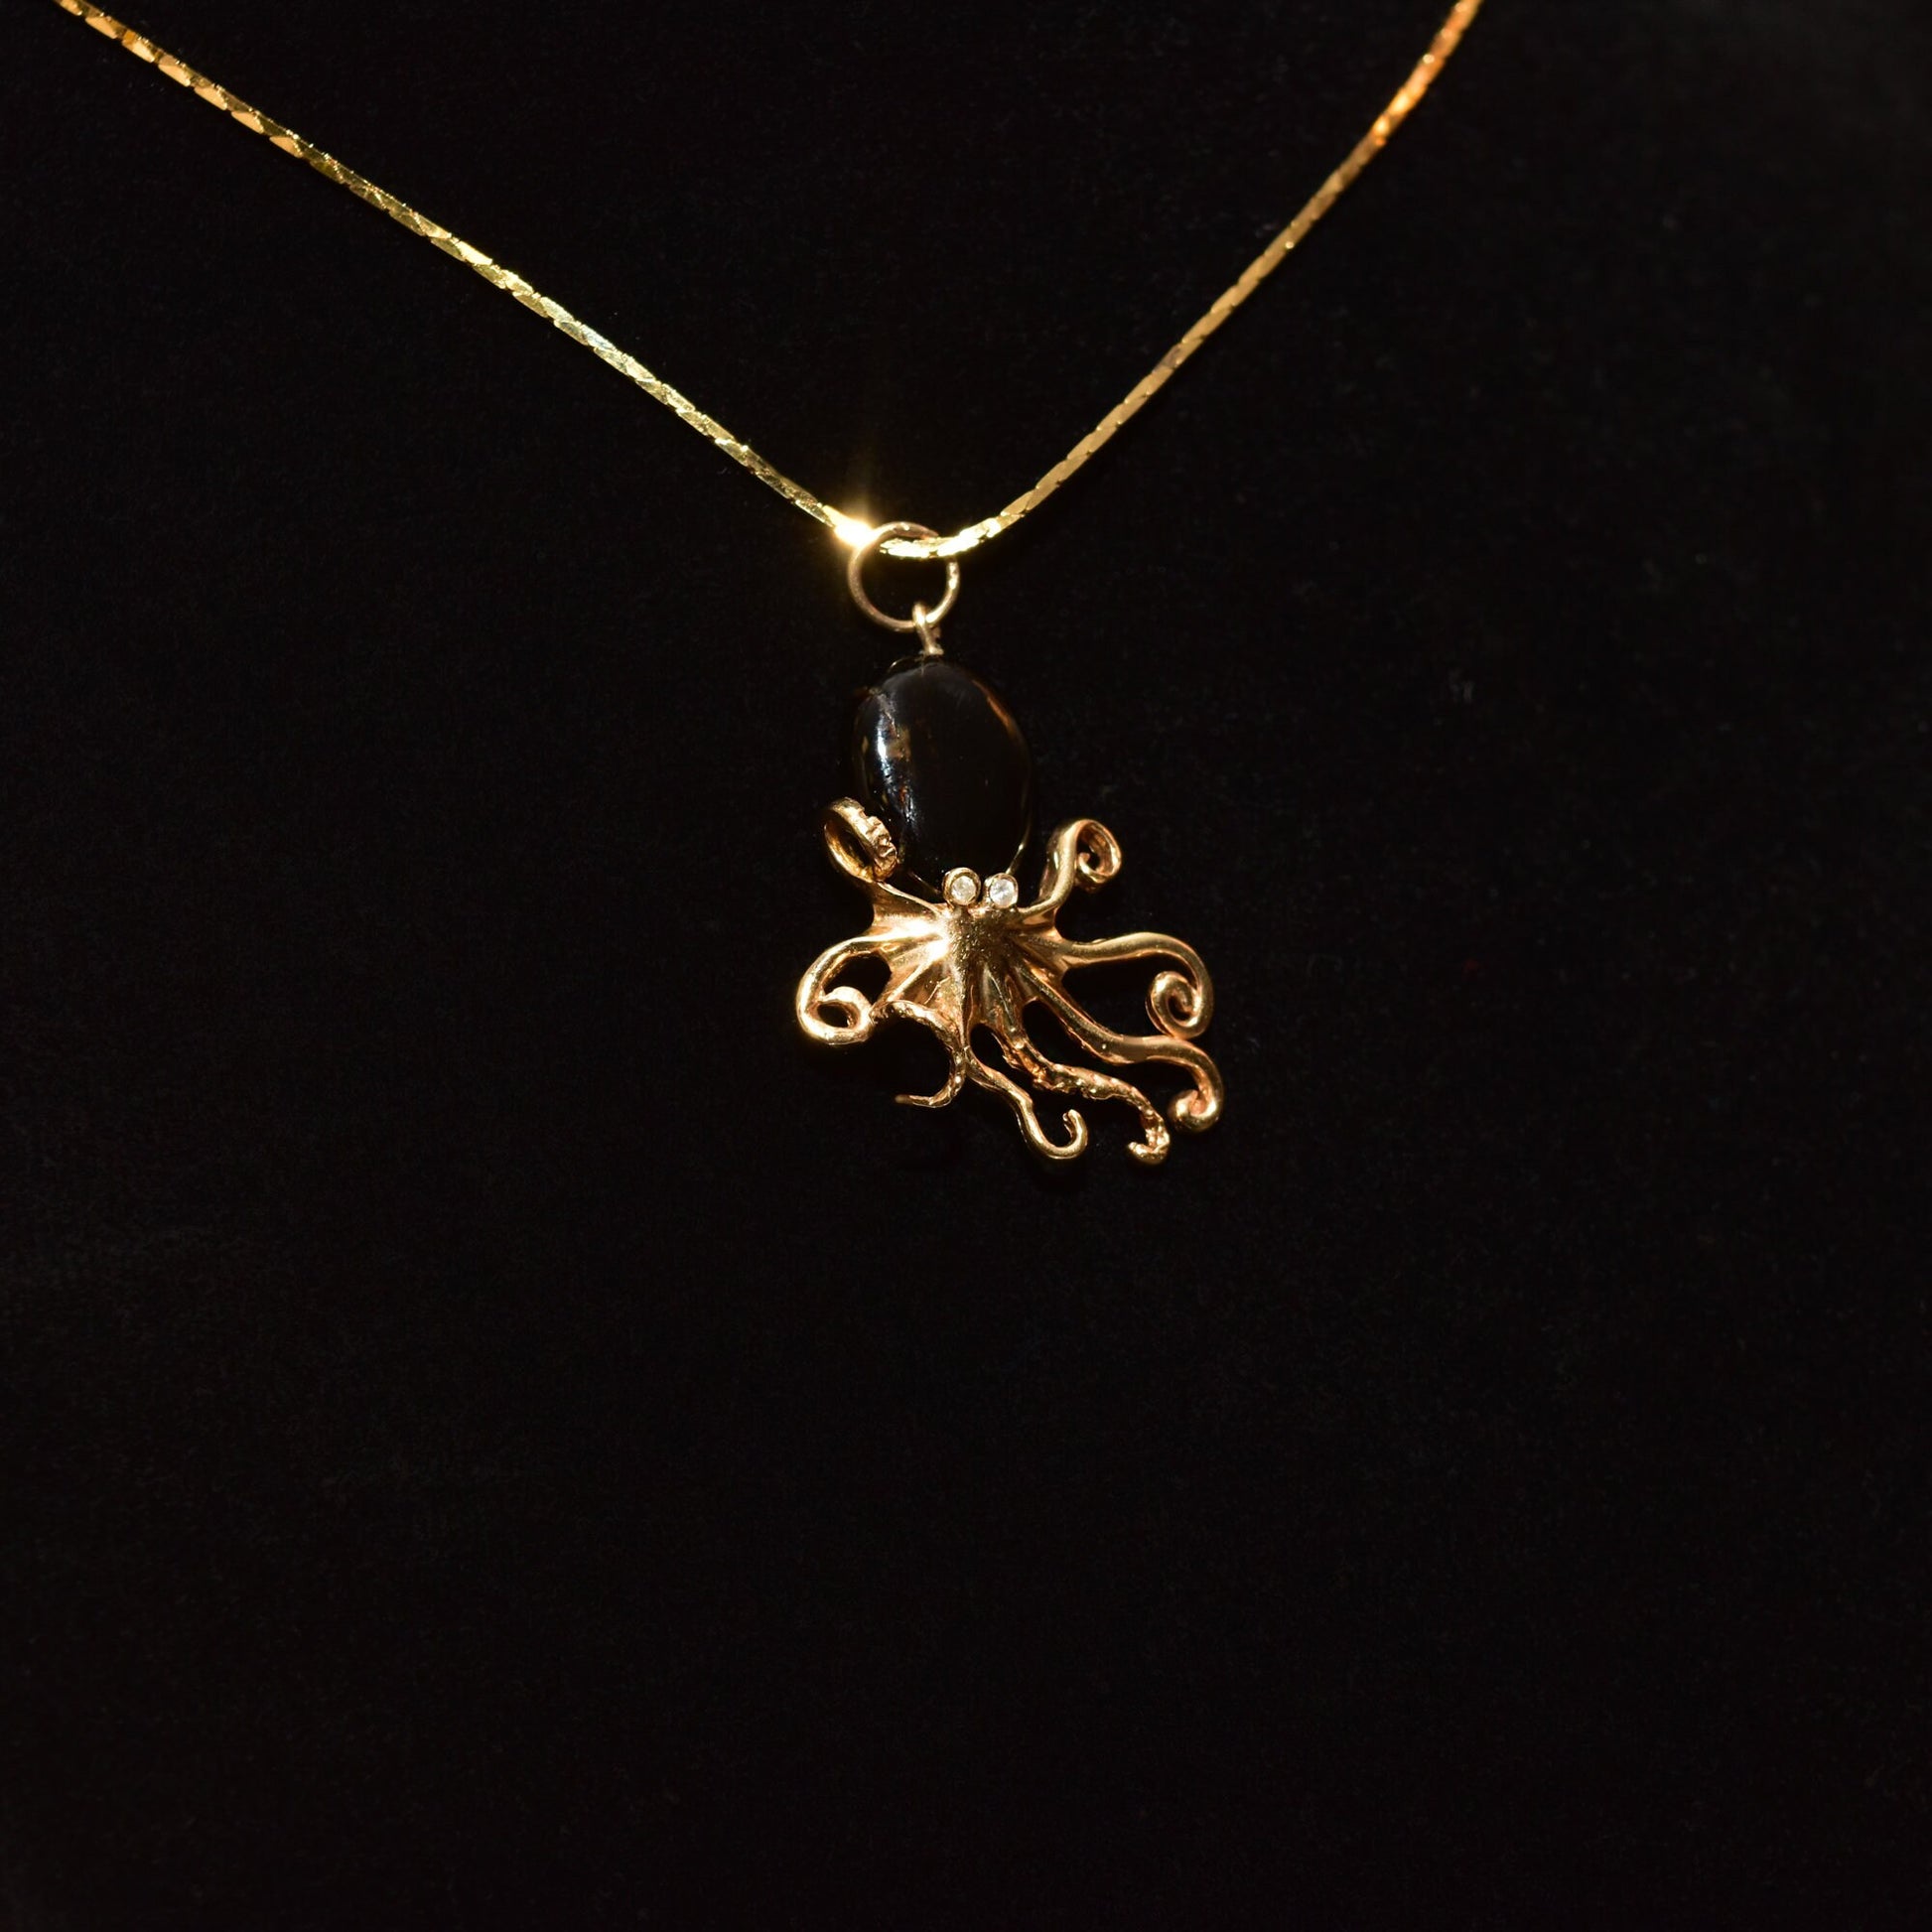 10K yellow gold octopus pendant necklace with black coral and diamond accents on a thin gold chain, showcased against a black background.